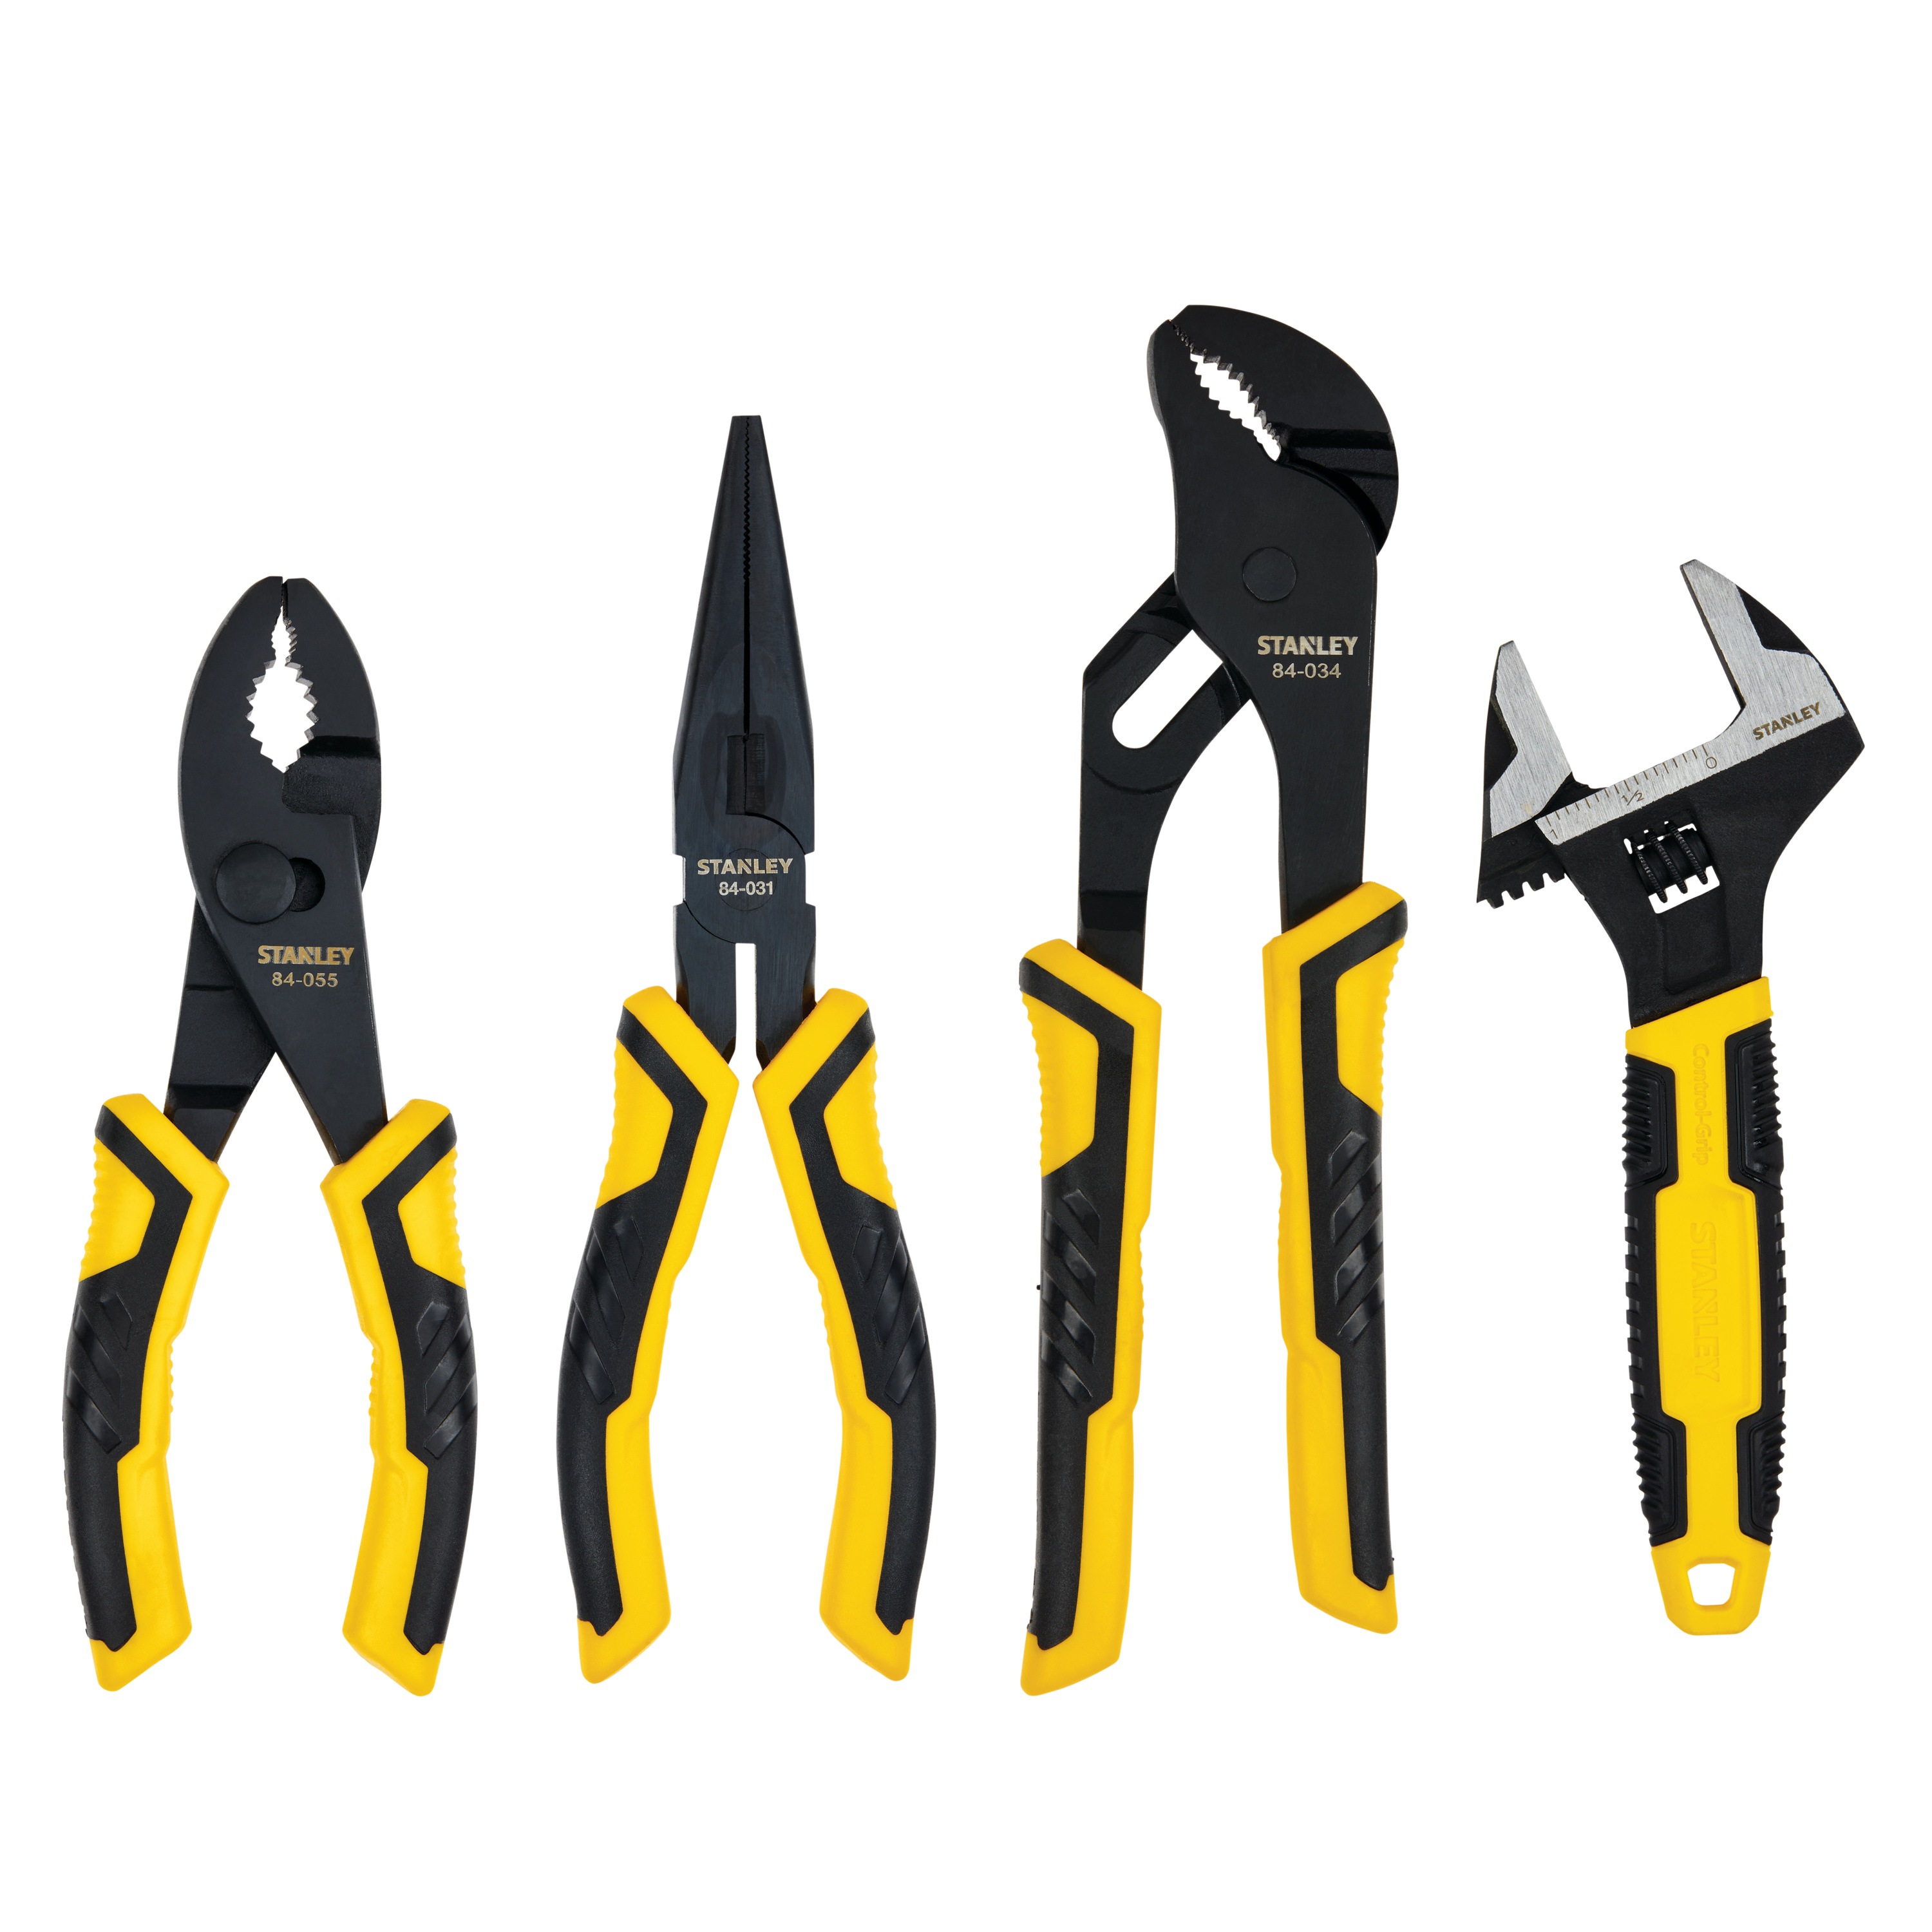 Stanley Tools - 4pc Pliers and Adjustable Wrench Set - 84-558